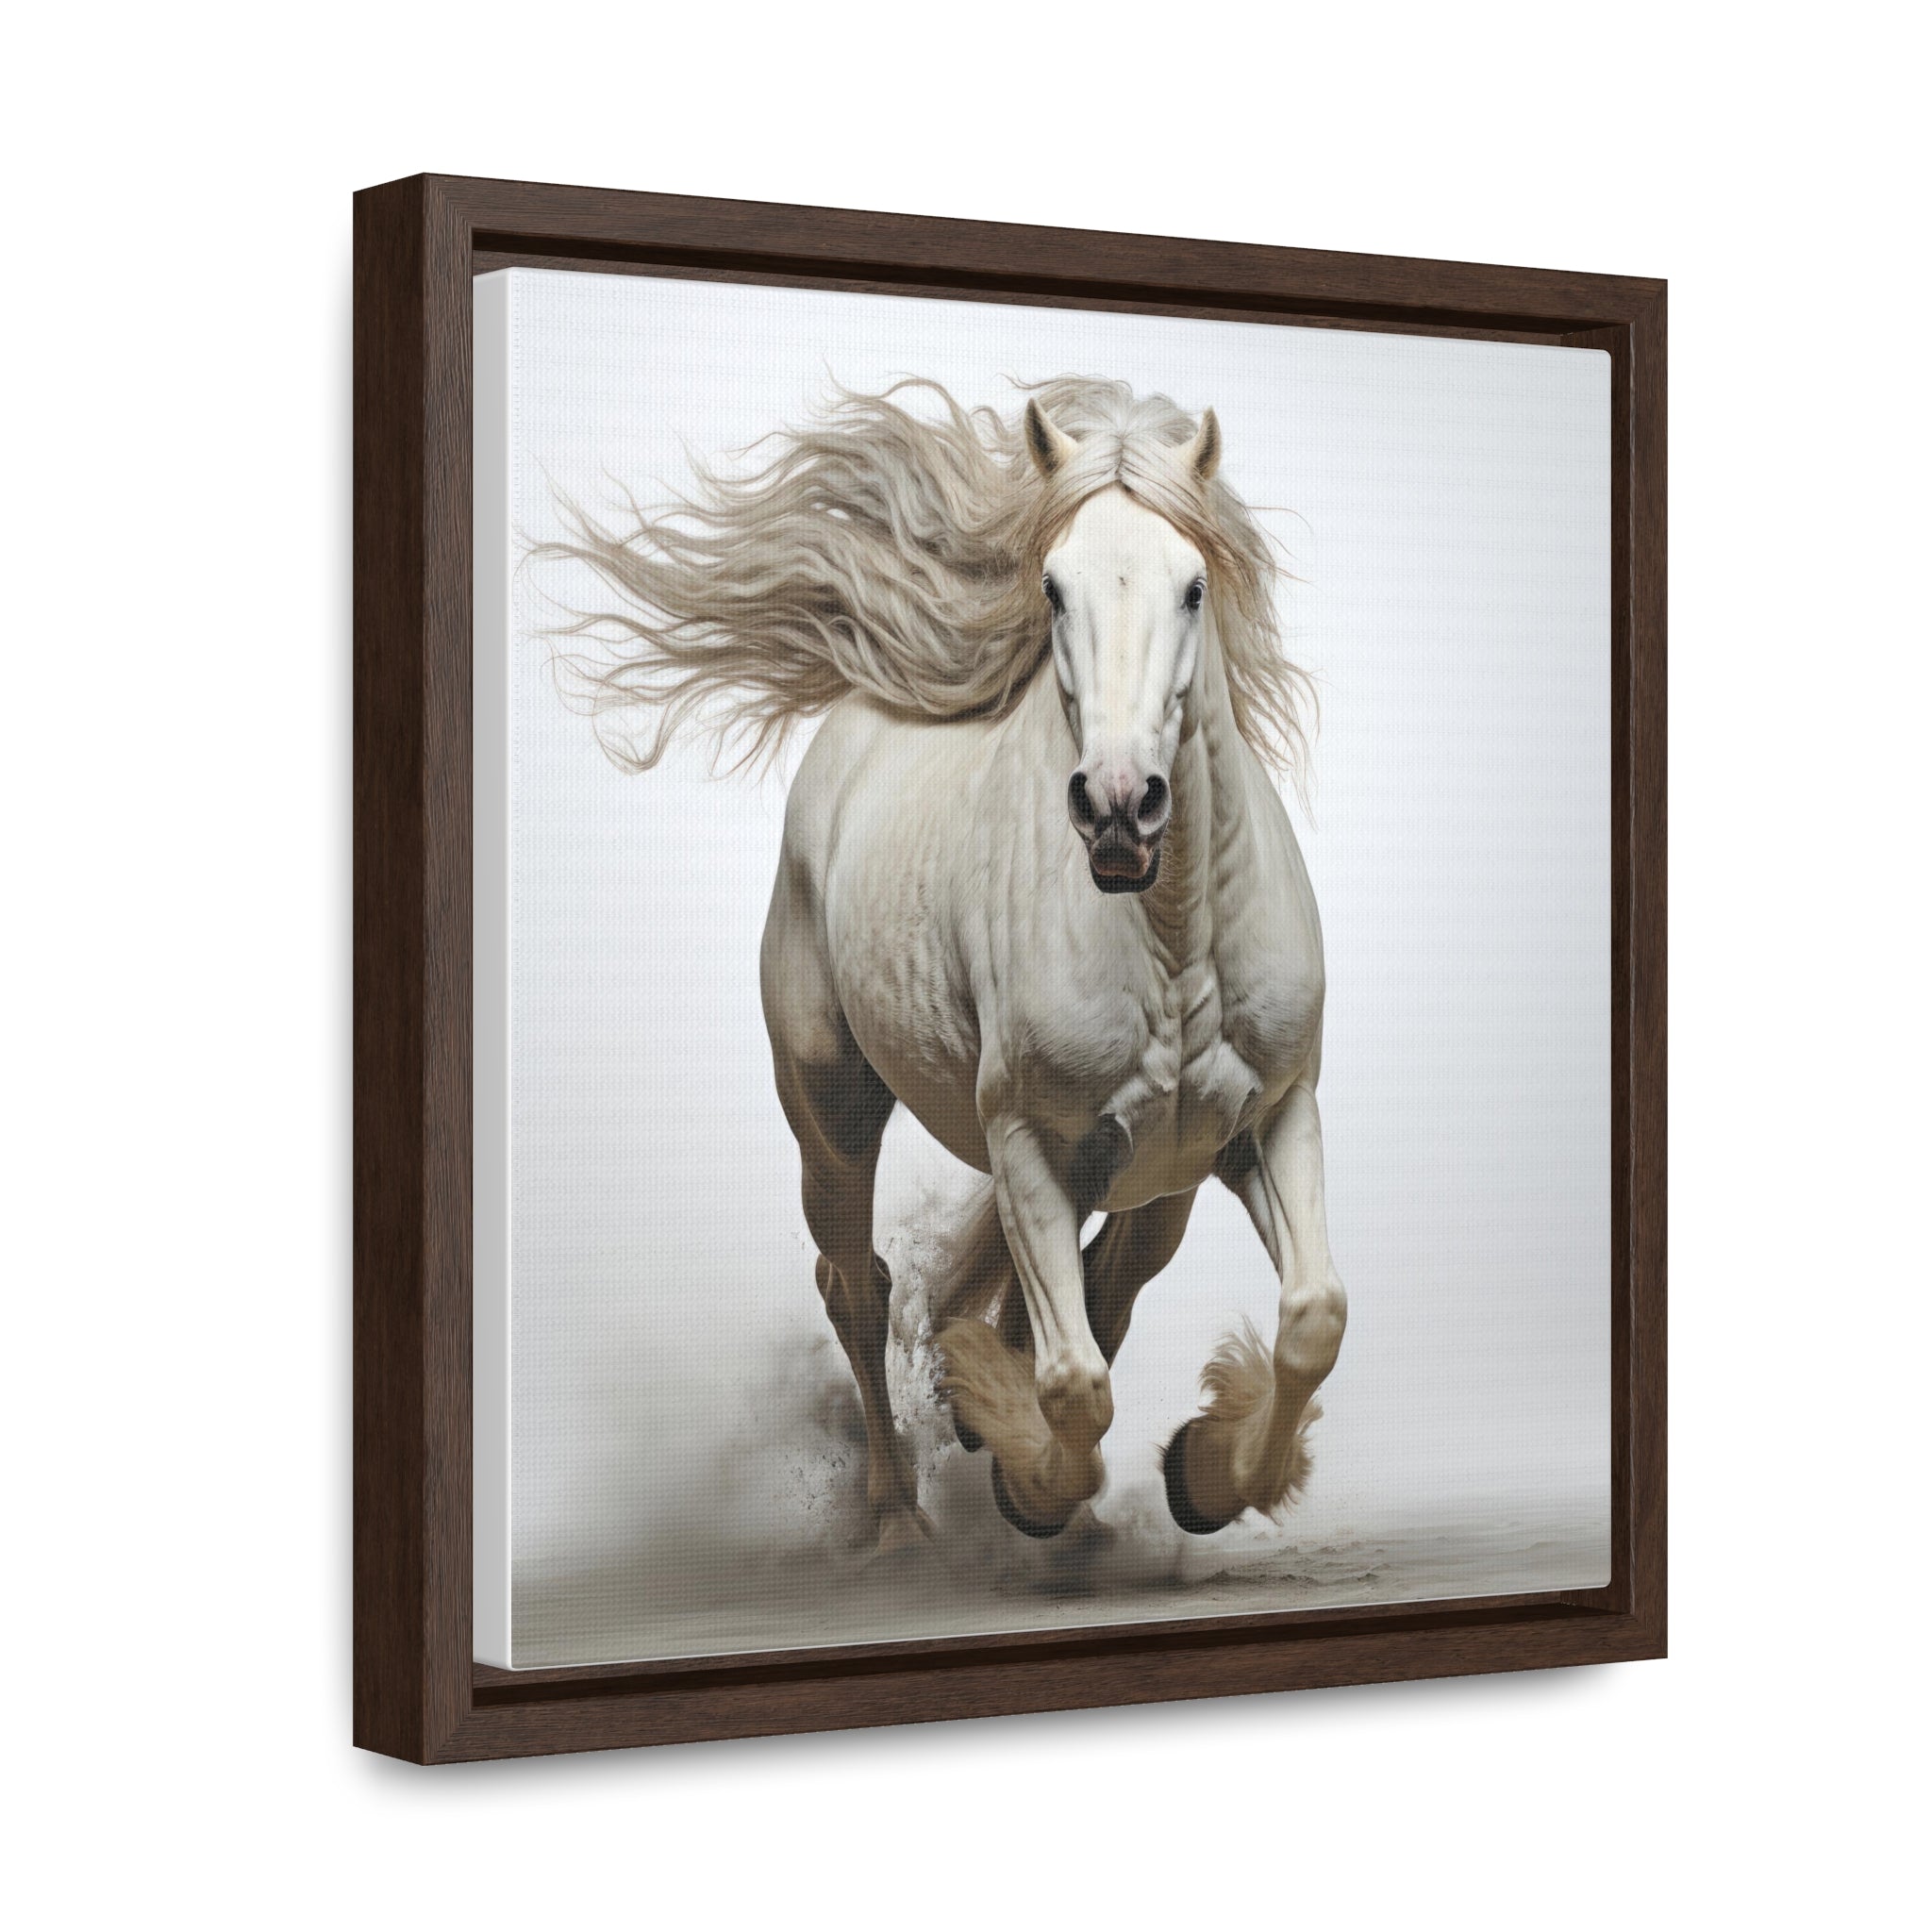 Snow White Horse Running | Gallery Canvas Wraps, Square Frame